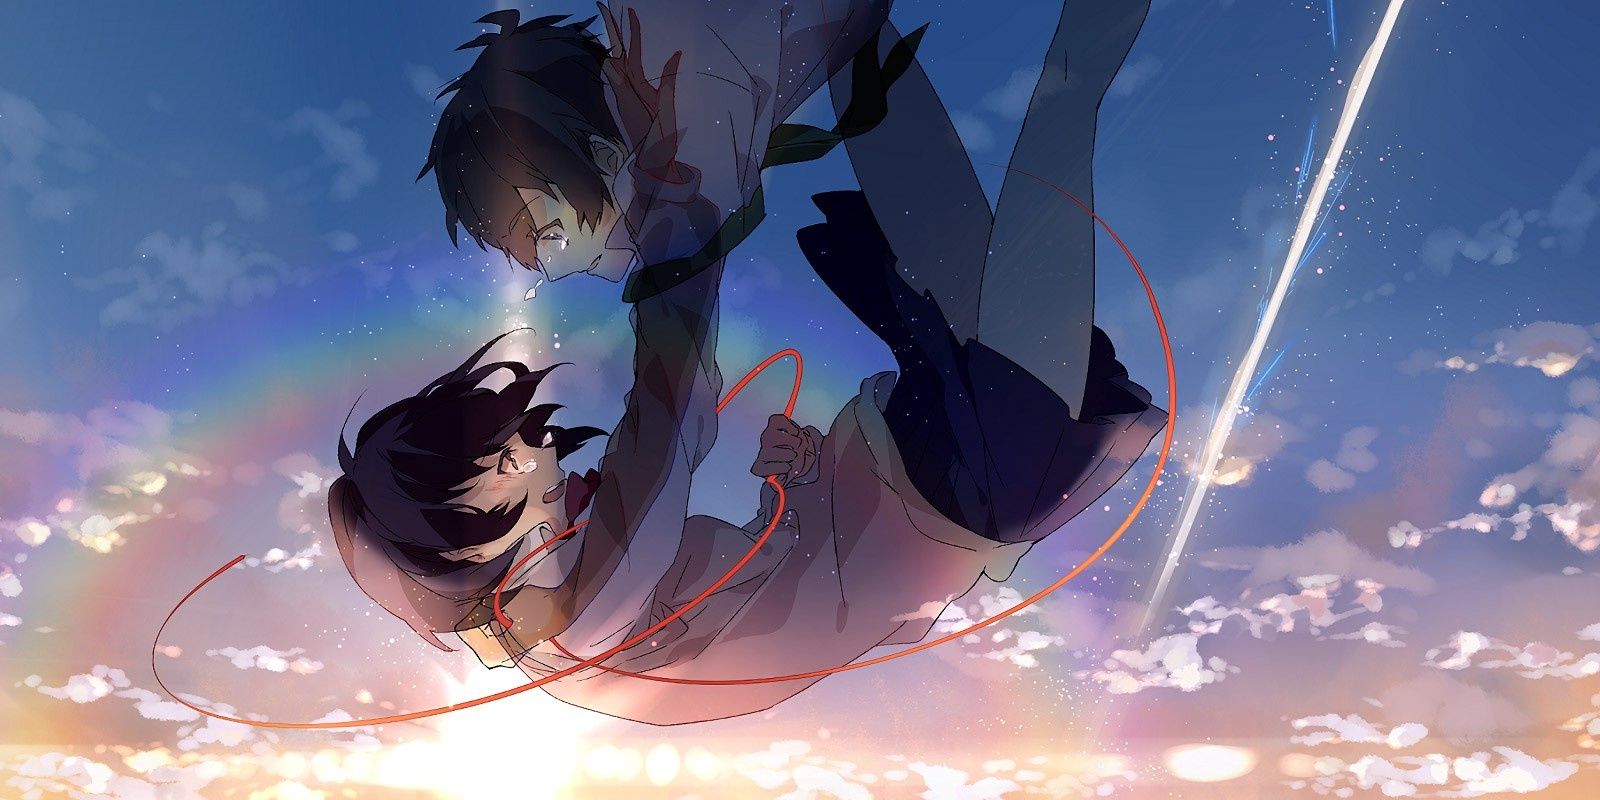 Your Name is a movie about missed connections